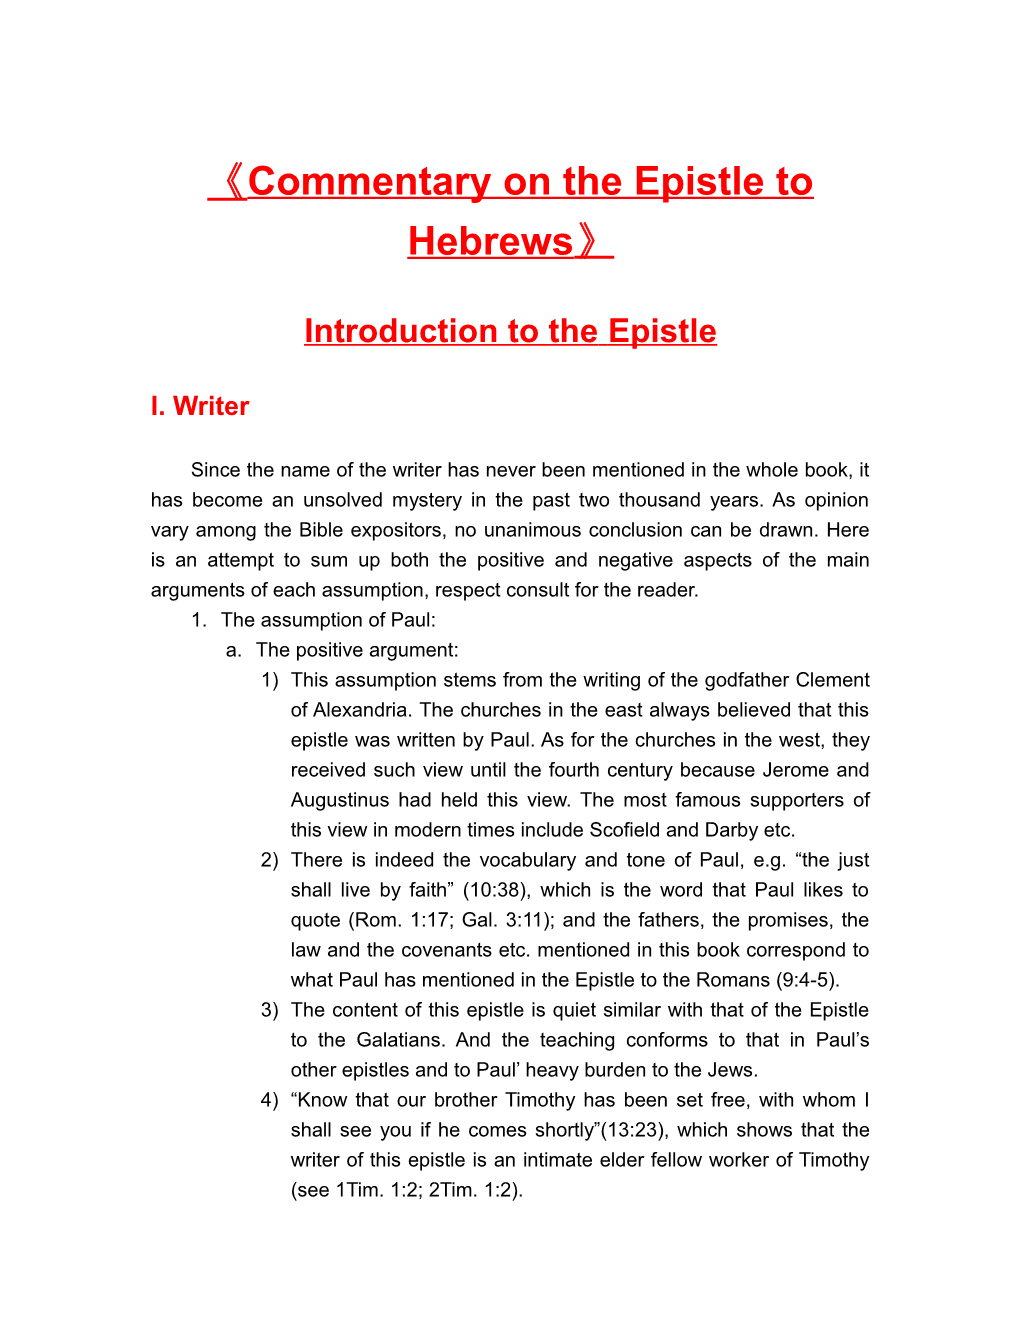 Commentary on the Epistle to Hebrews